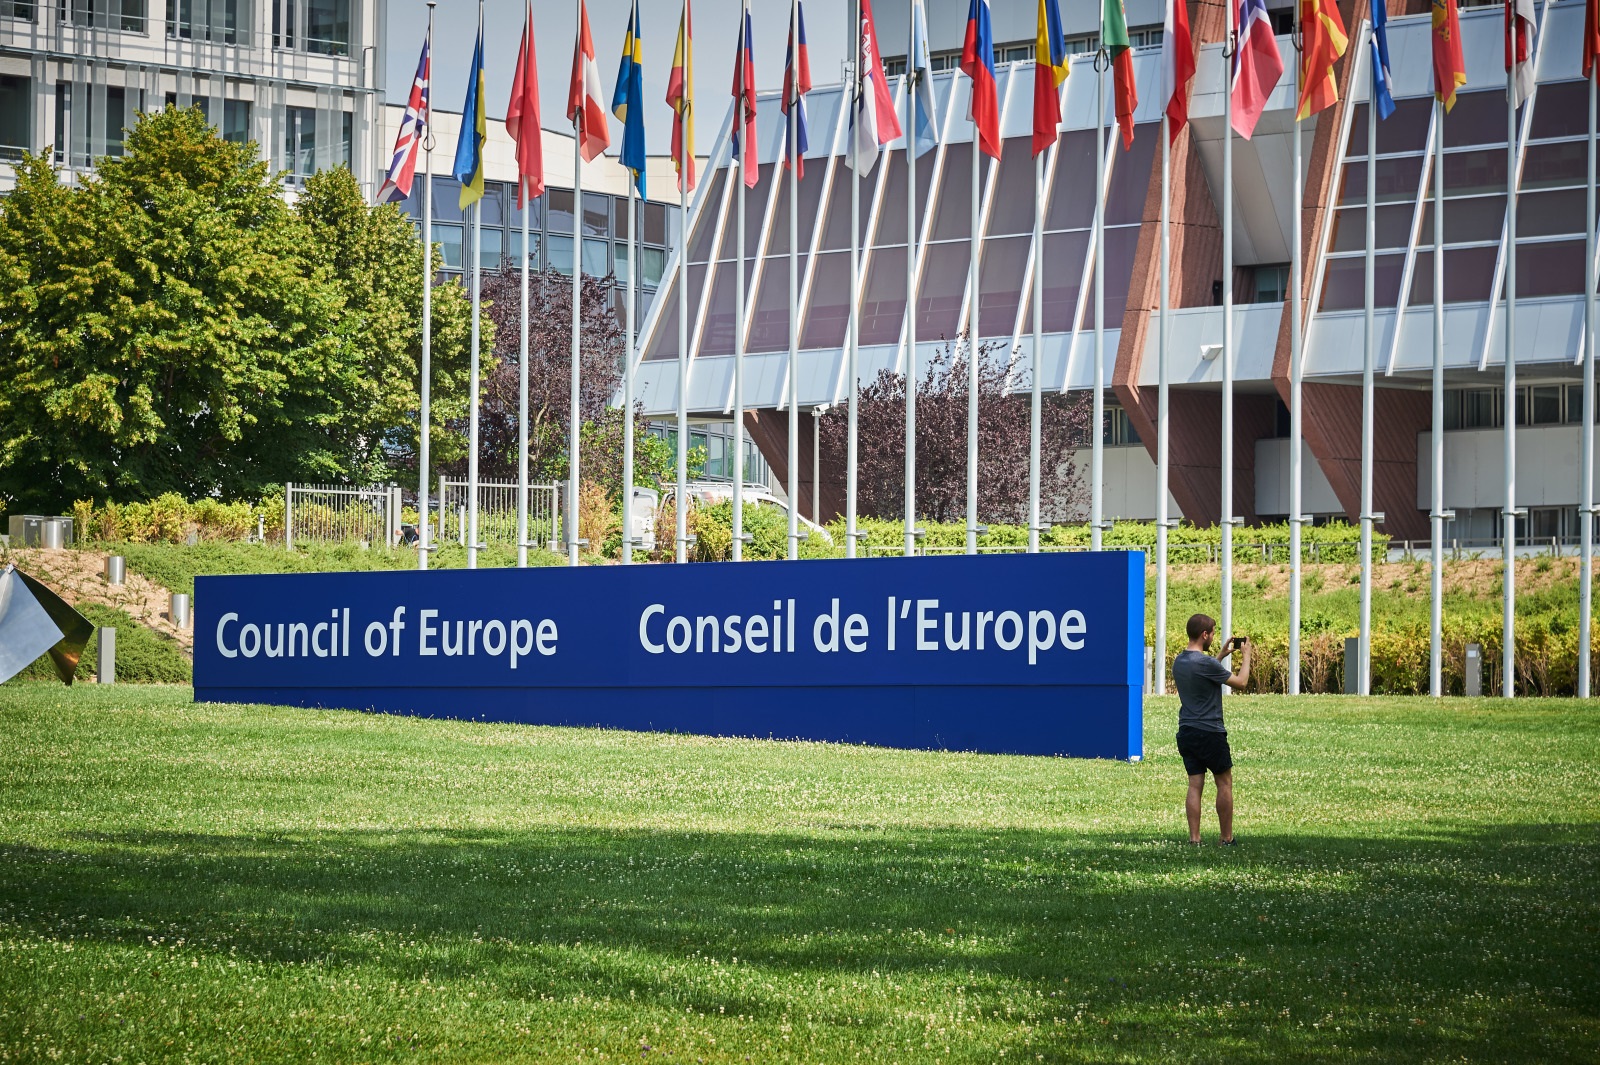 The Committees of the two Council of Europe treaties meet back to back for the first time